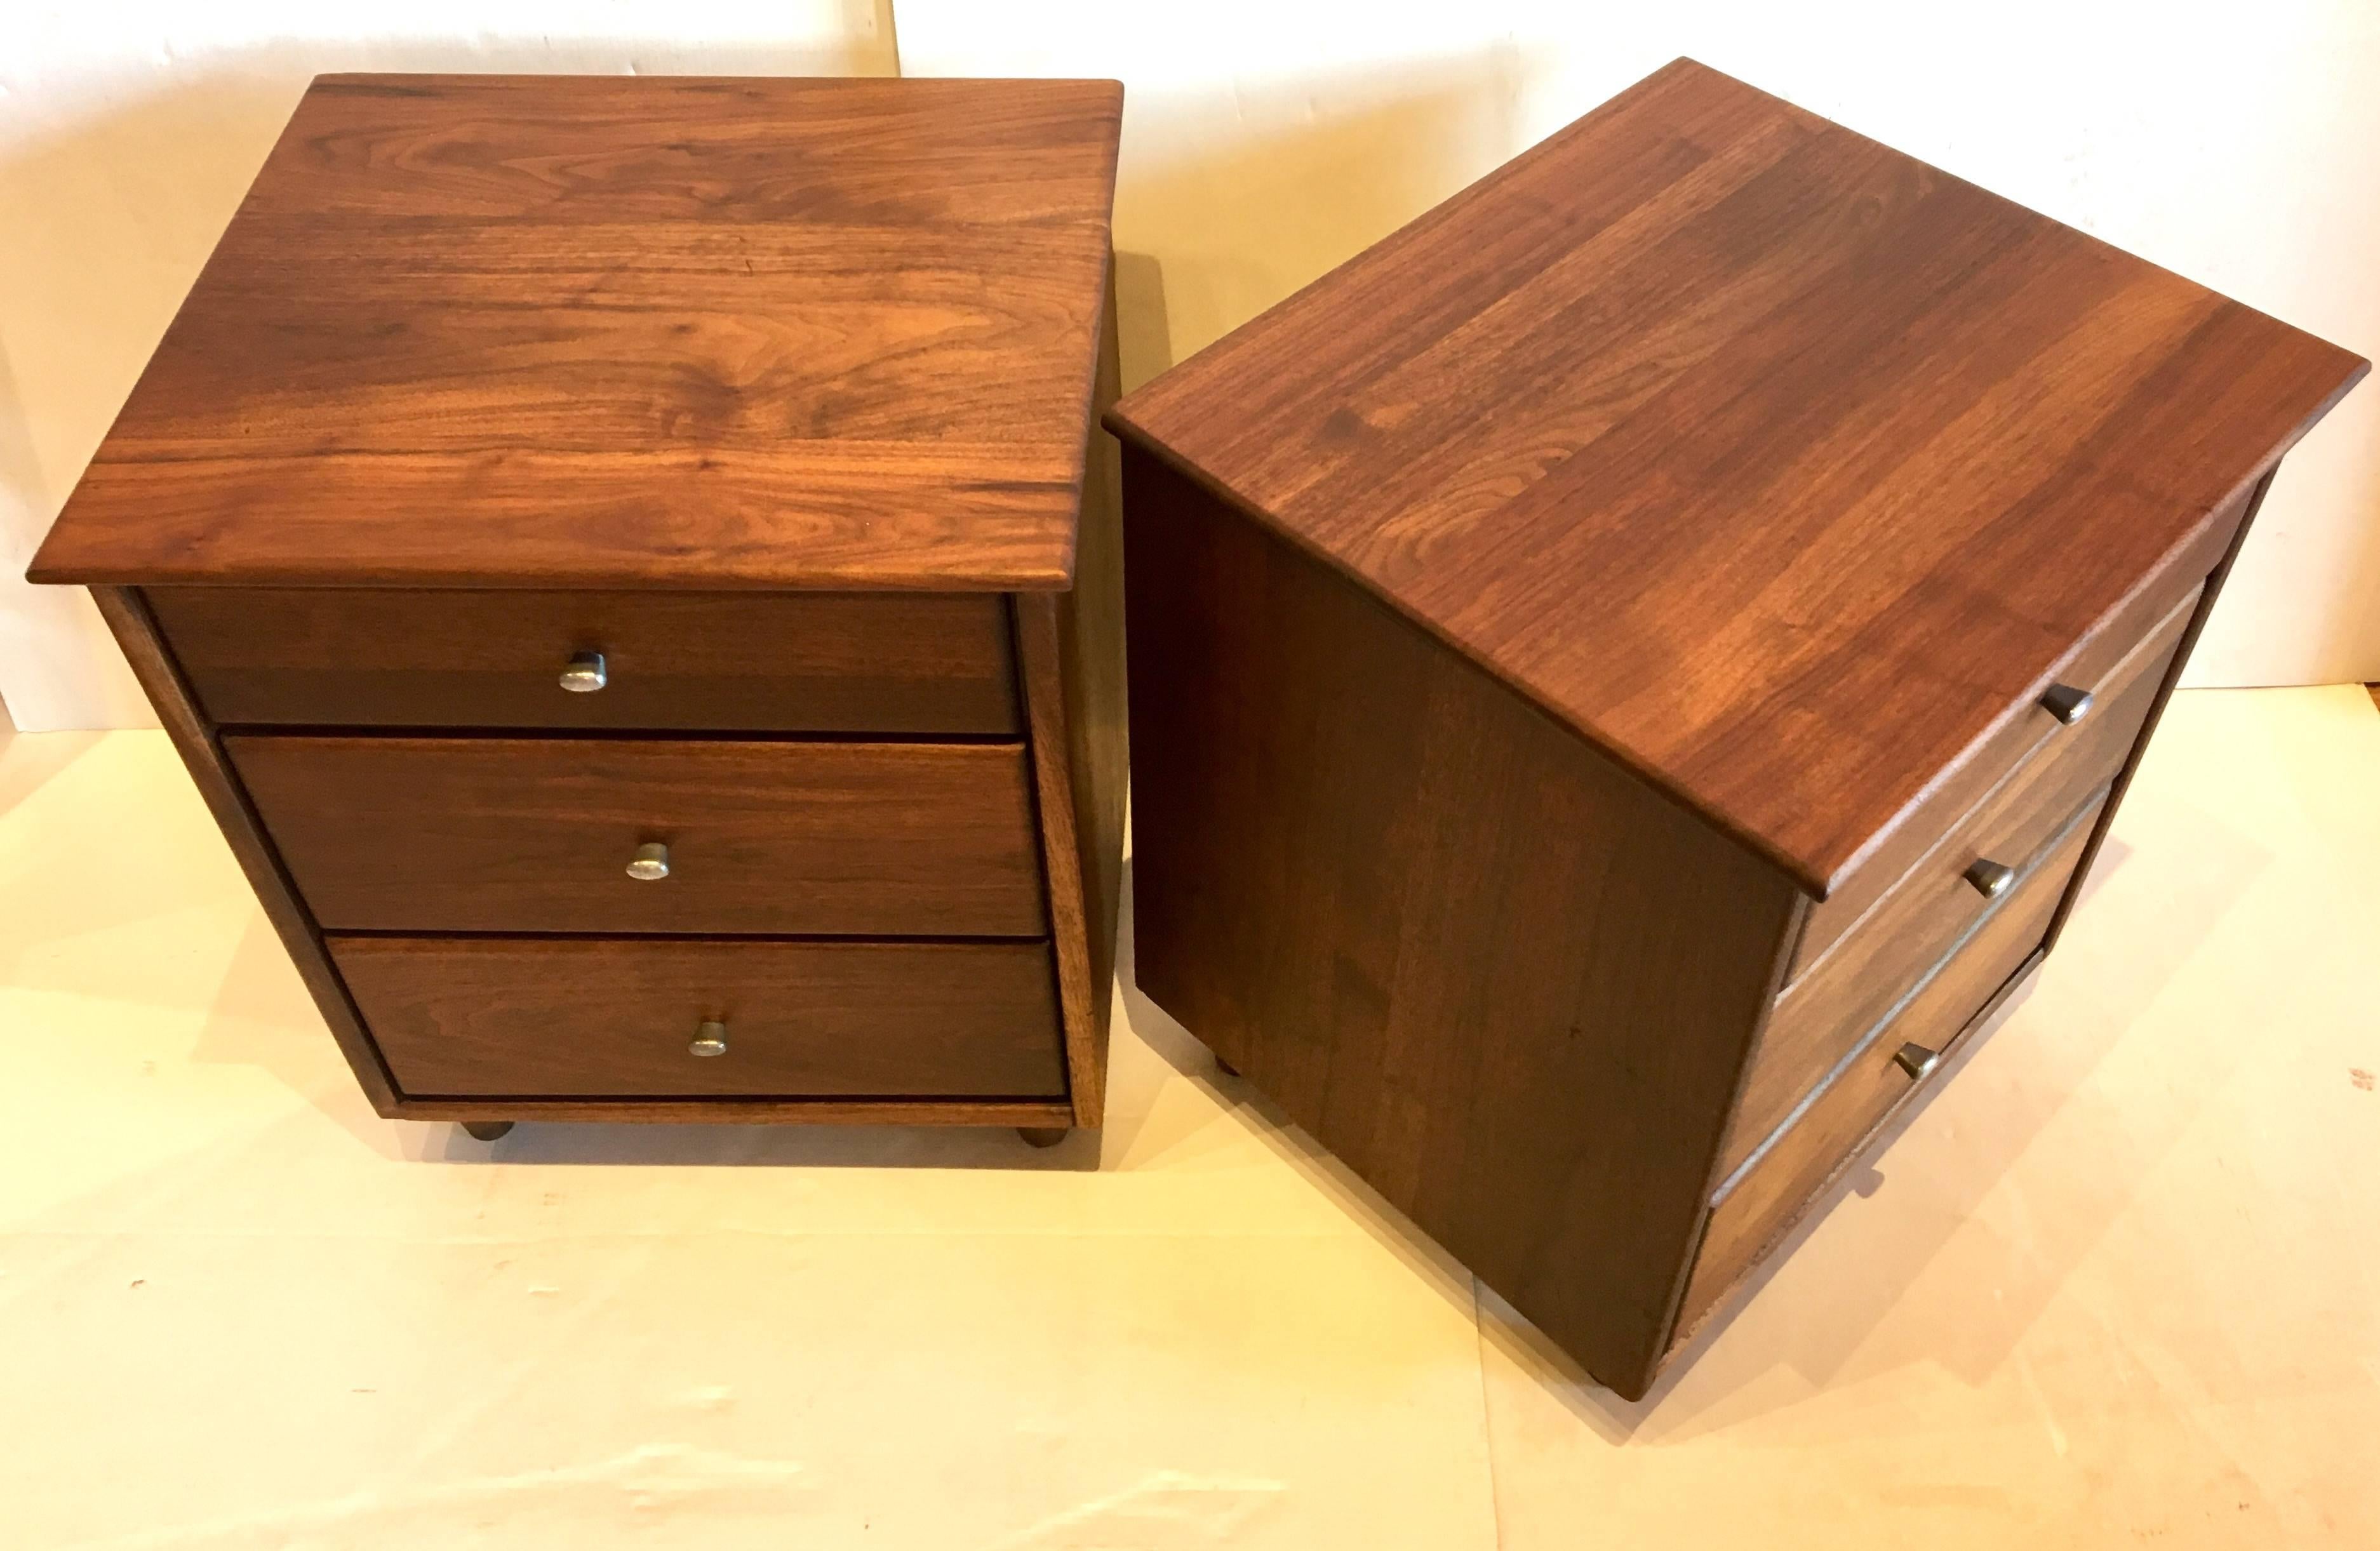 Great set of solid walnut nightstands. American mid-century California design, circa 1960s. Freshly refinished with polished aluminium handles and triple drawer dovetail finish. Great quality and craftsmanship.